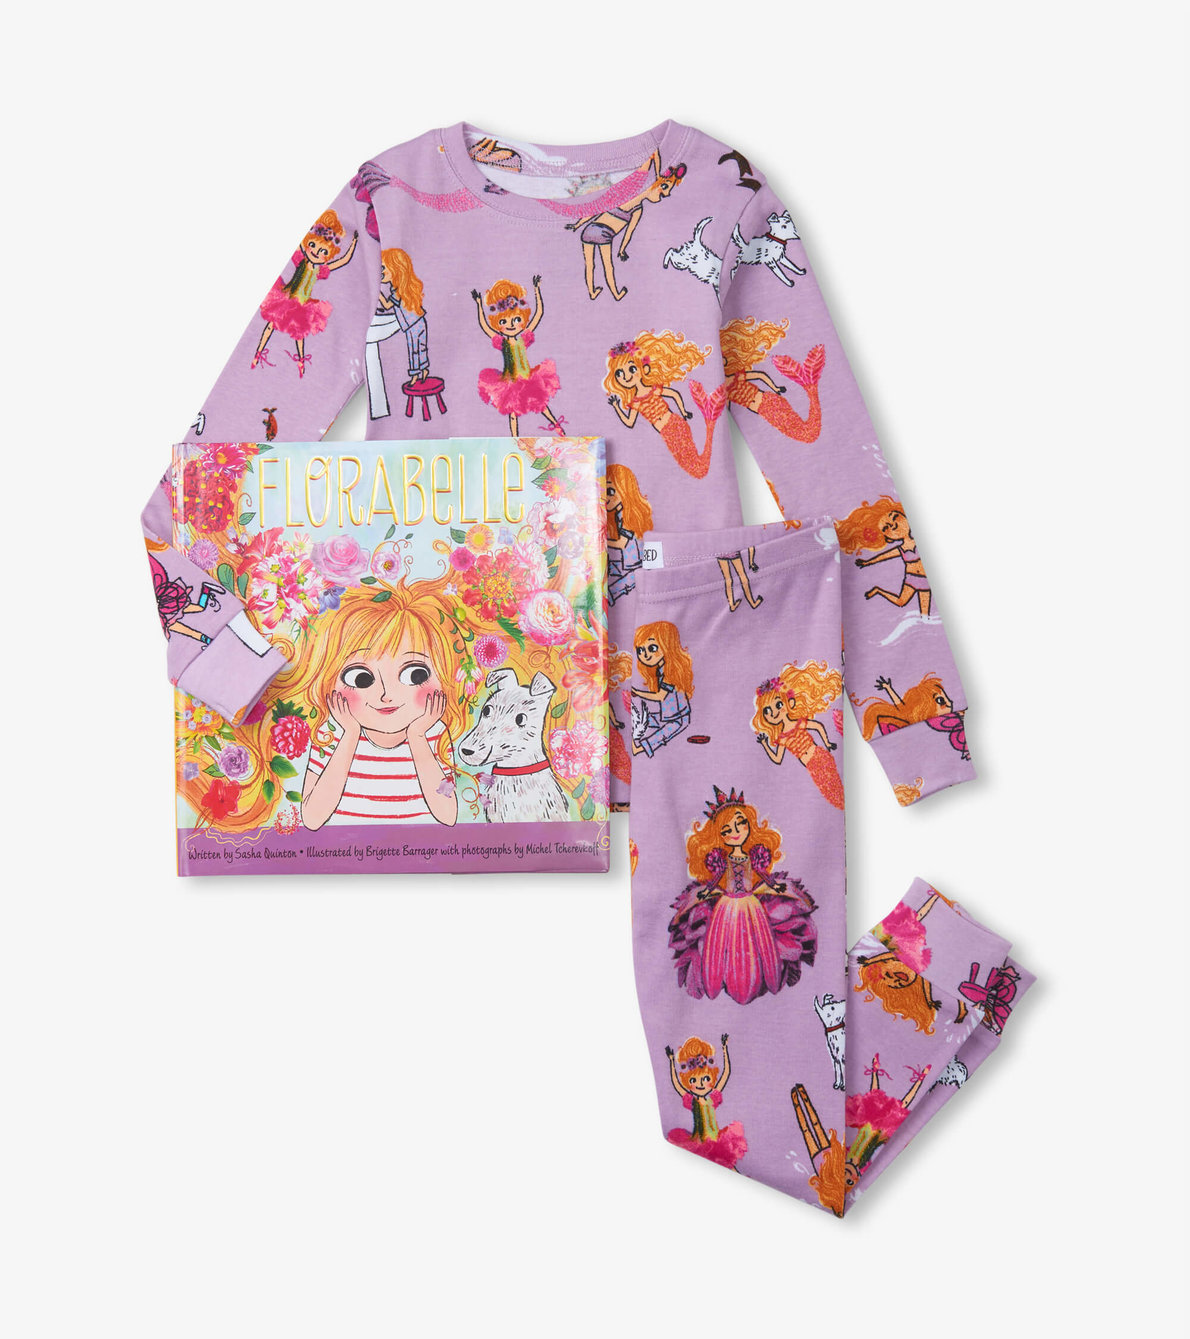 View larger image of Florabelle Book and Pajama Set